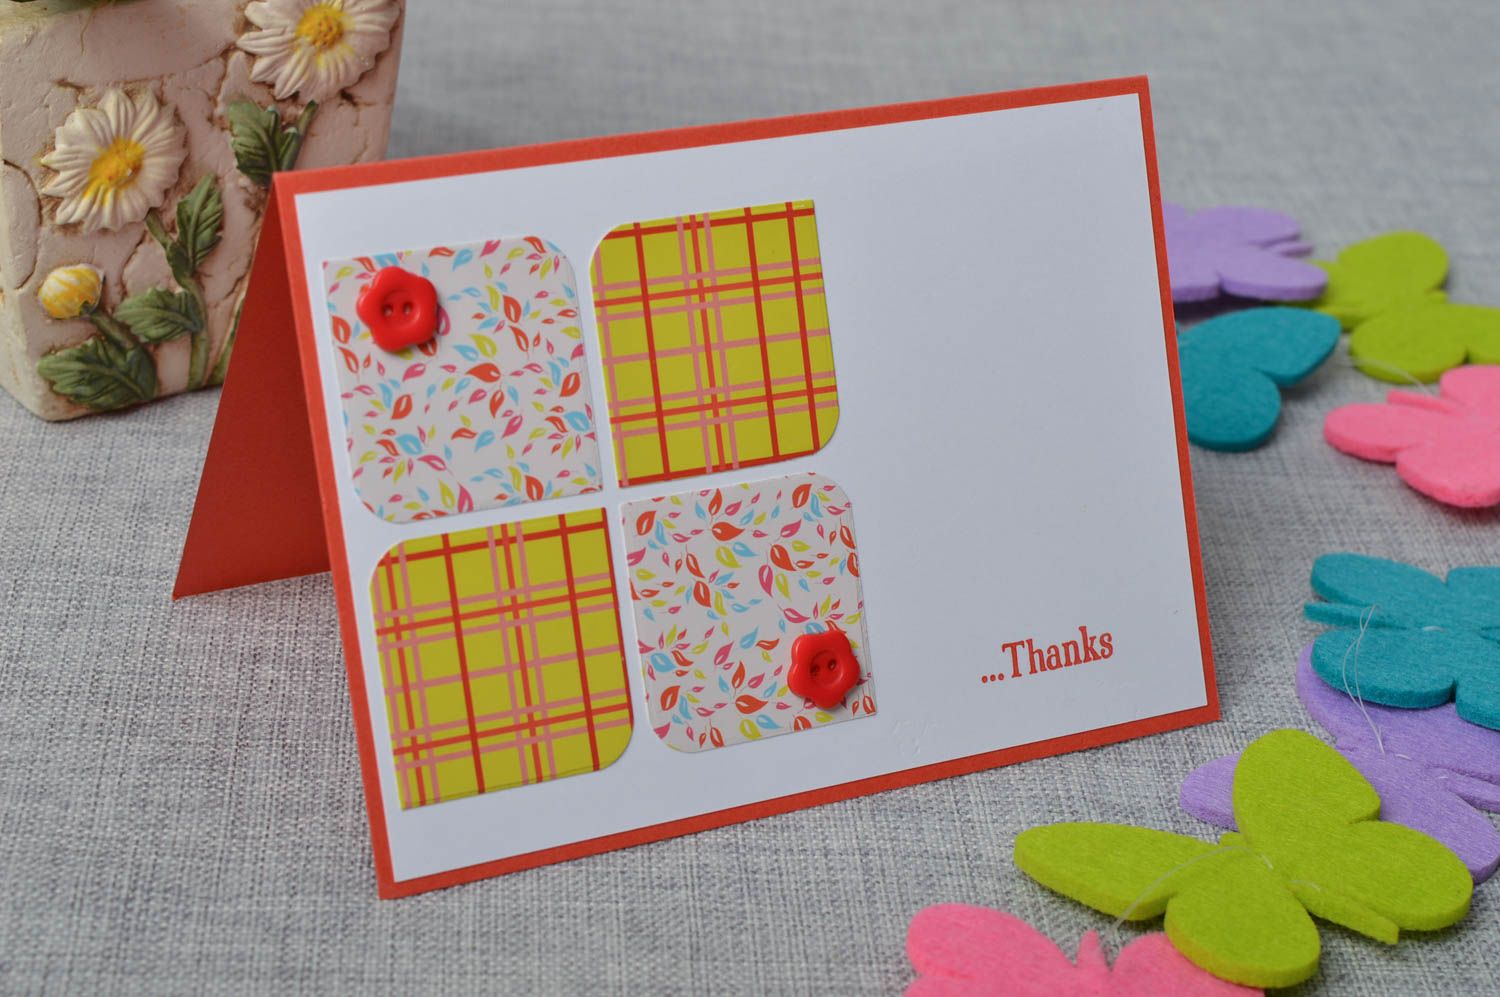 Handmade thank you card homemade cards greeting cards souvenir ideas cool gifts photo 1